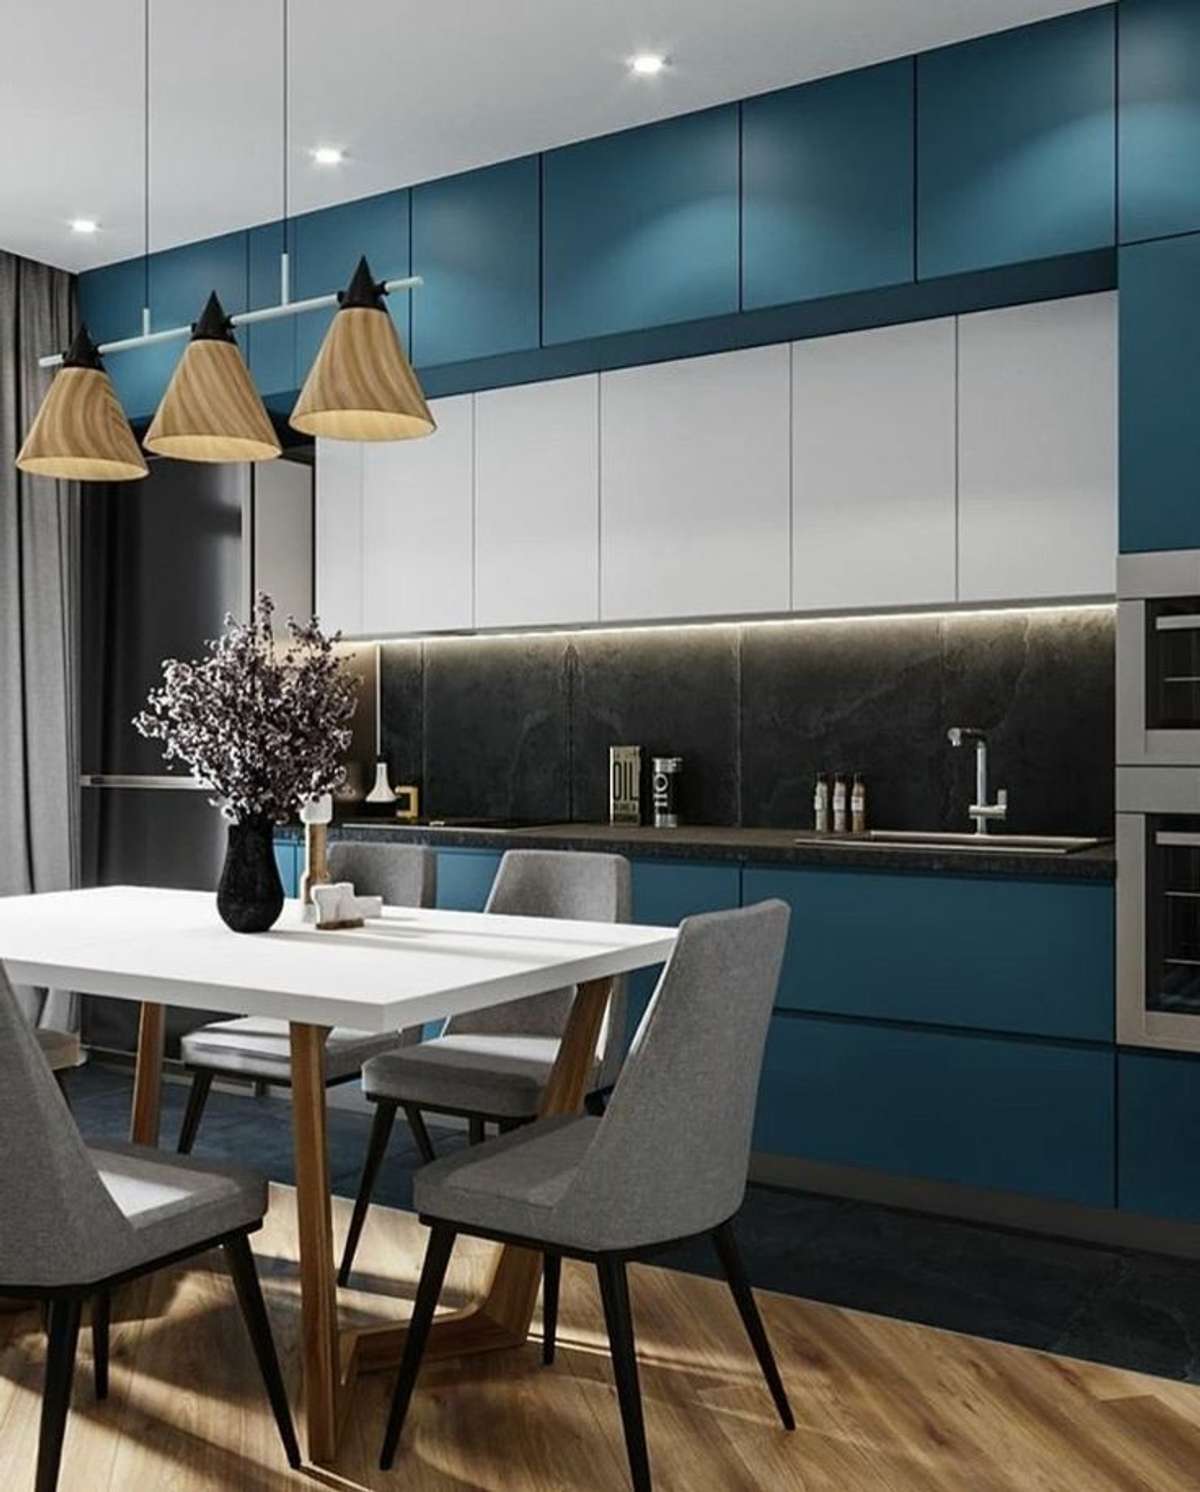 some modular kitchen what we can